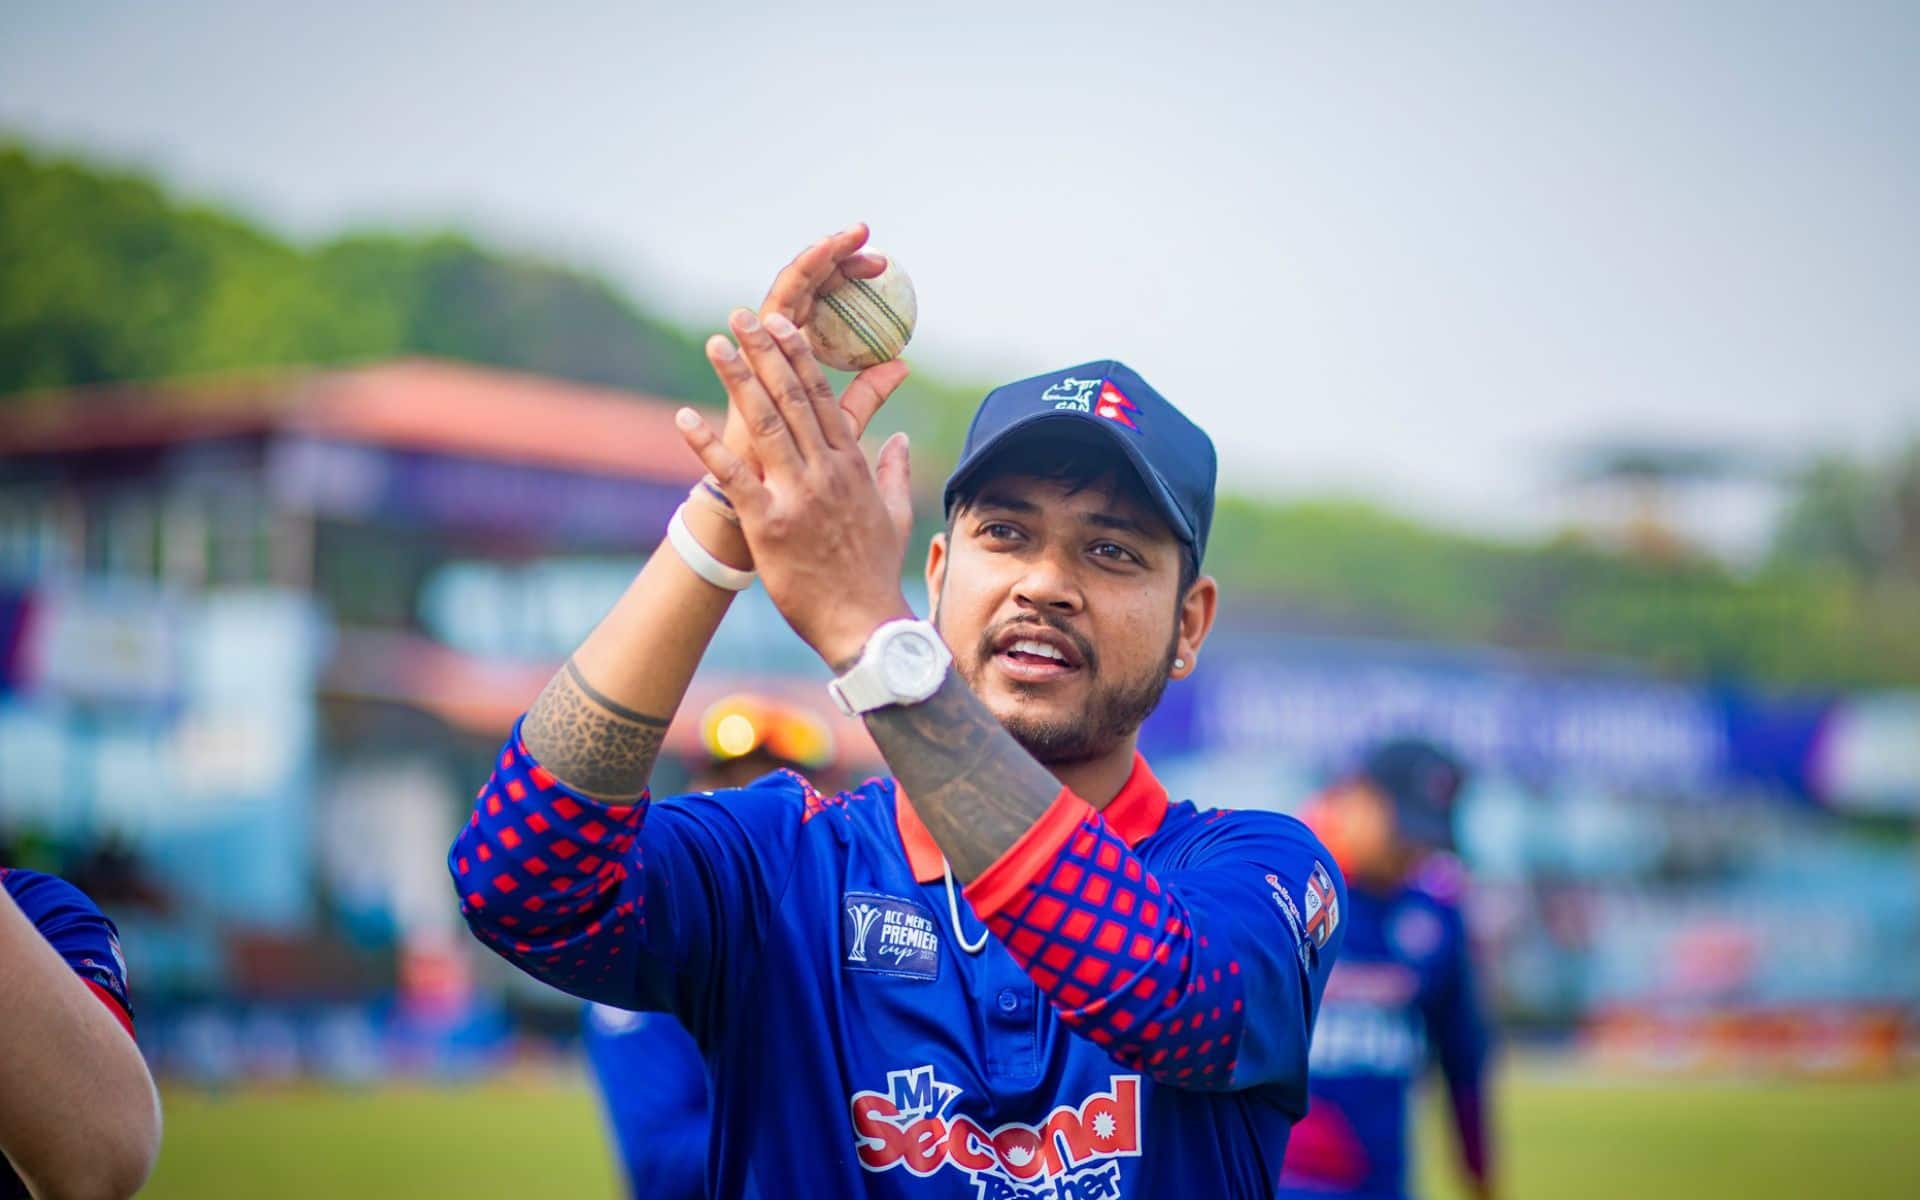 Sandeep Lamichhane will be playing for Nepal against South Africa [X]